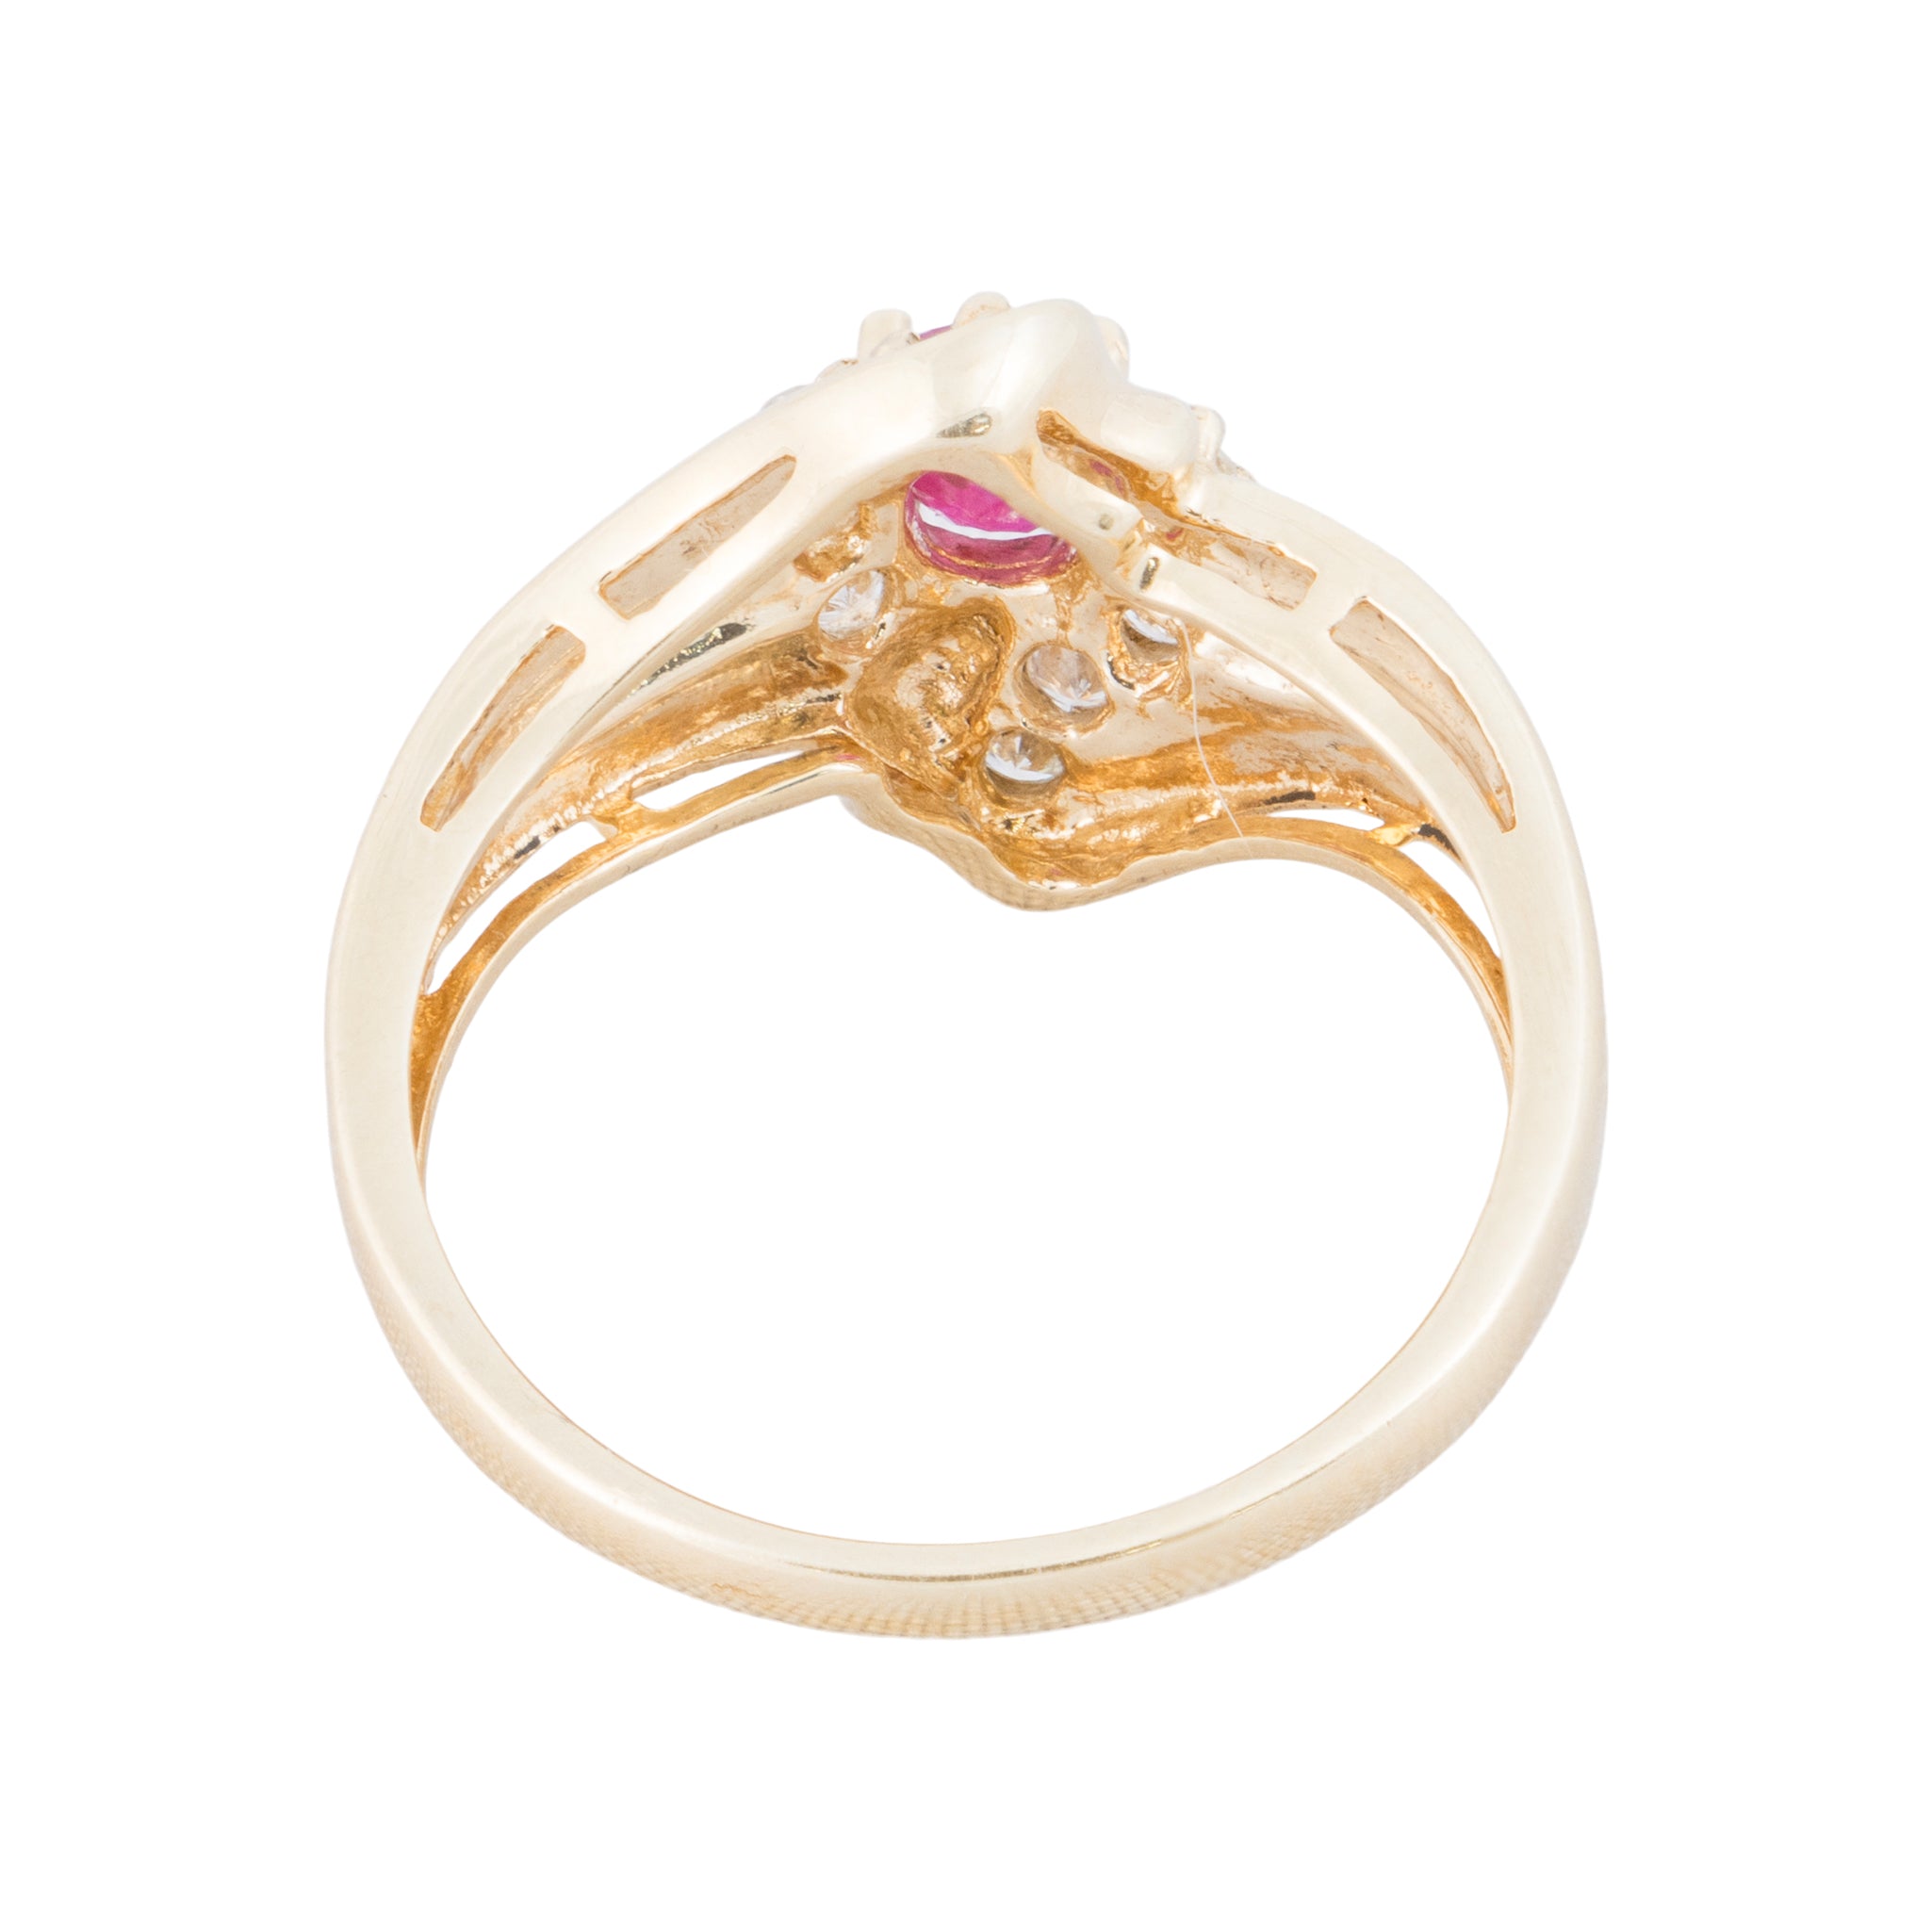 10k Gold Diamond and Ruby Ring